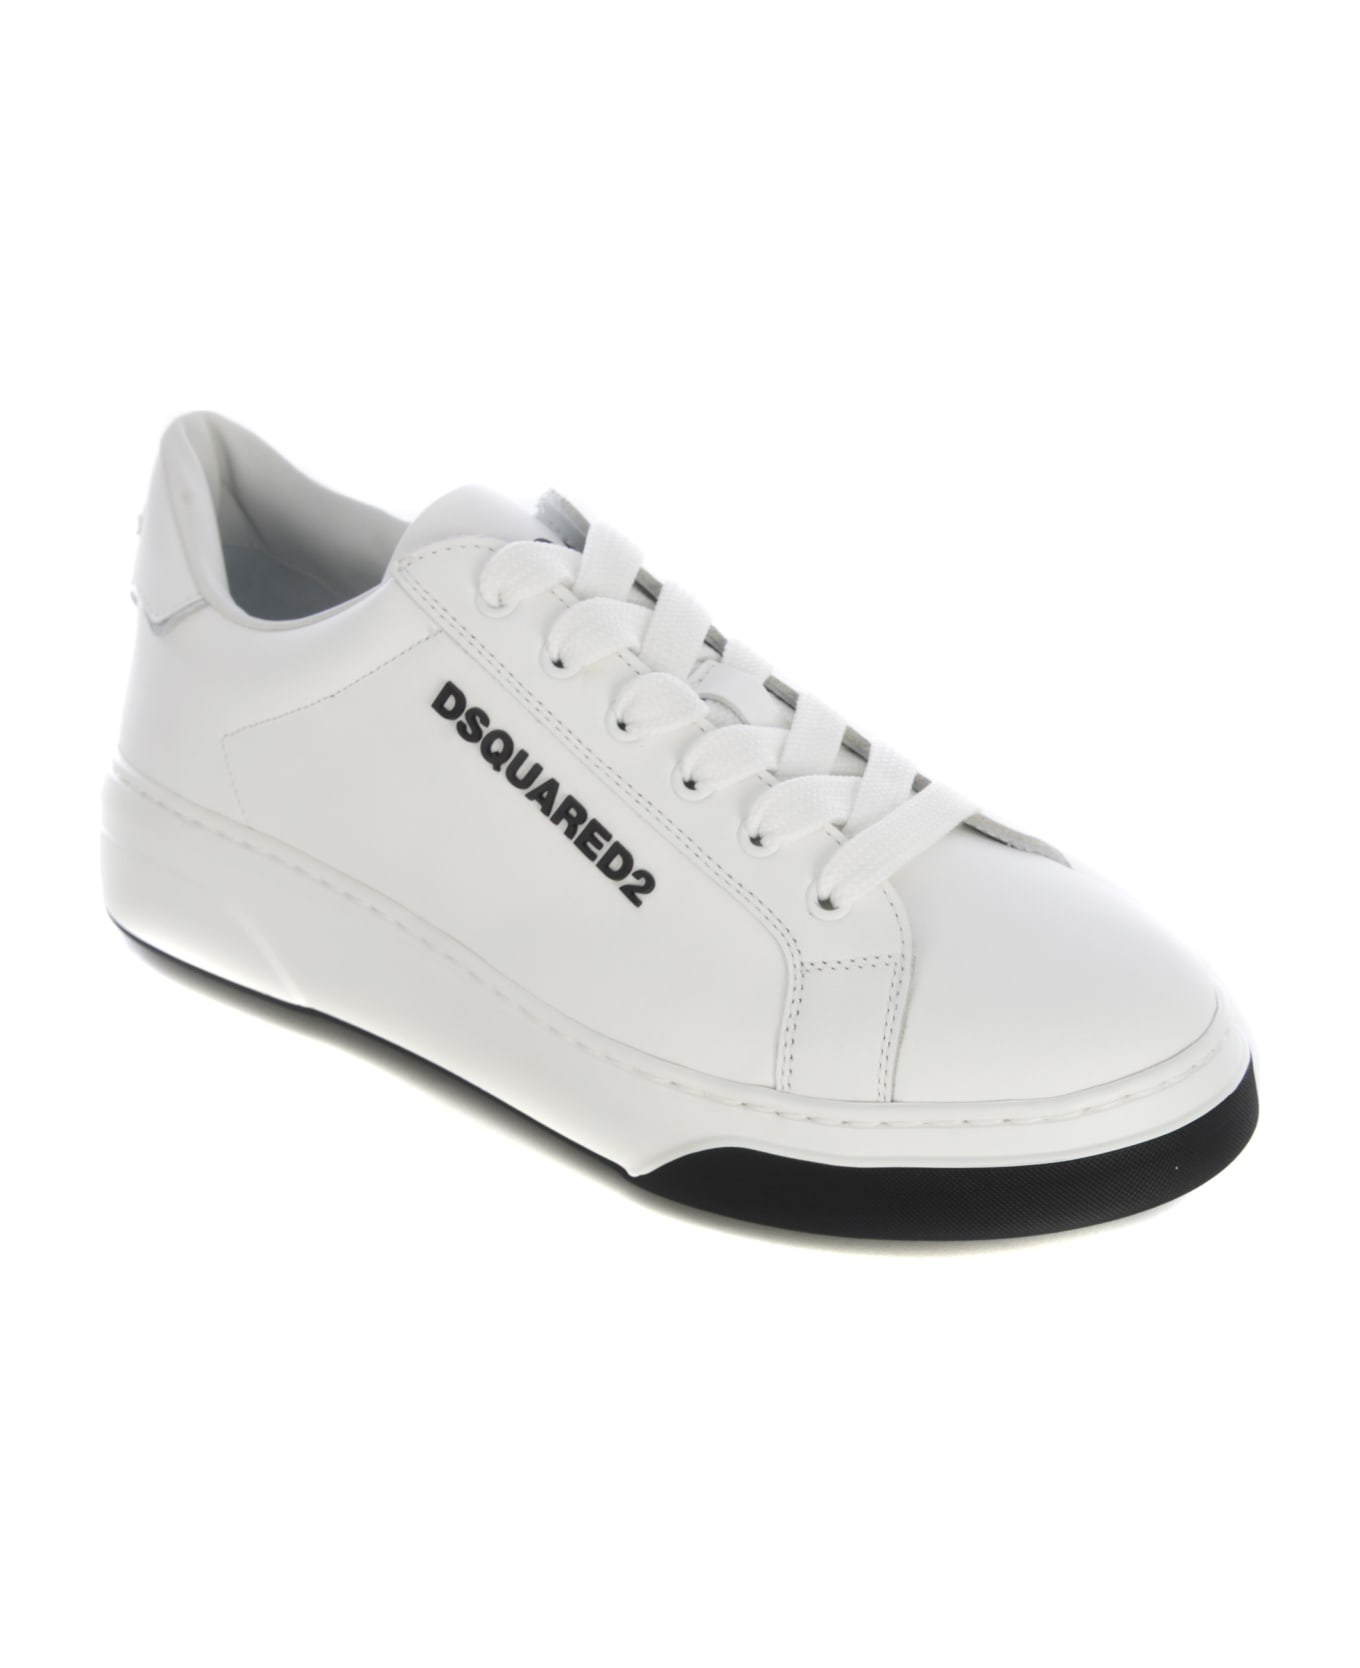 Dsquared2 Sneakers "1964" - Bianco スニーカー